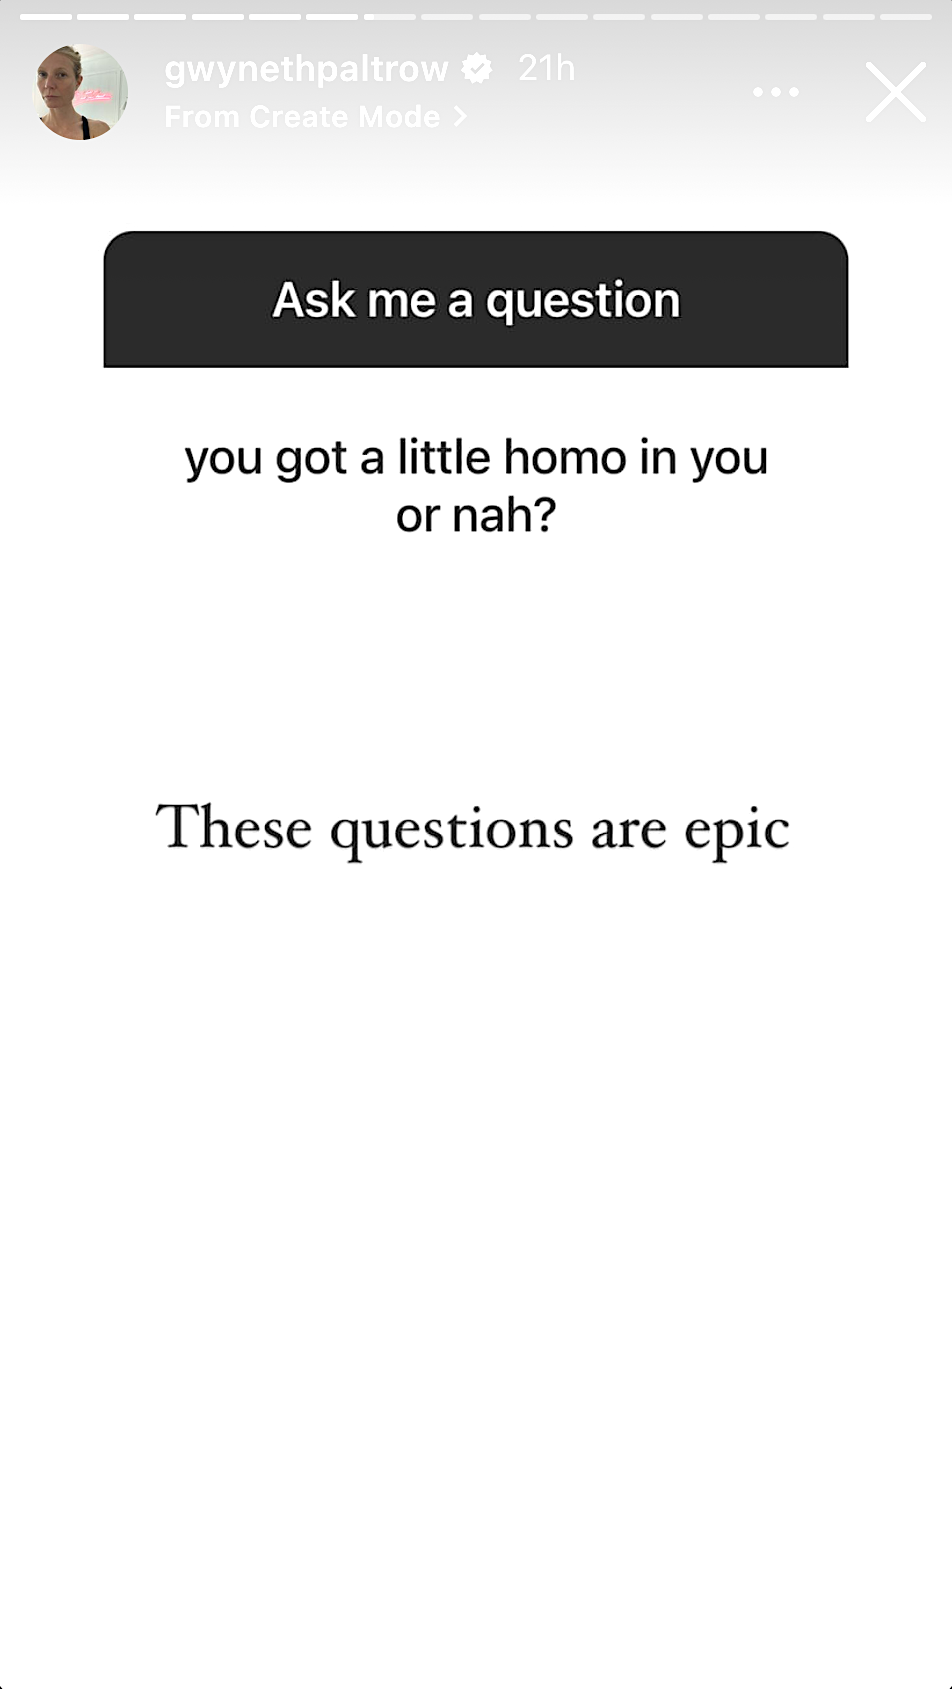 &quot;These questions are epic&quot;